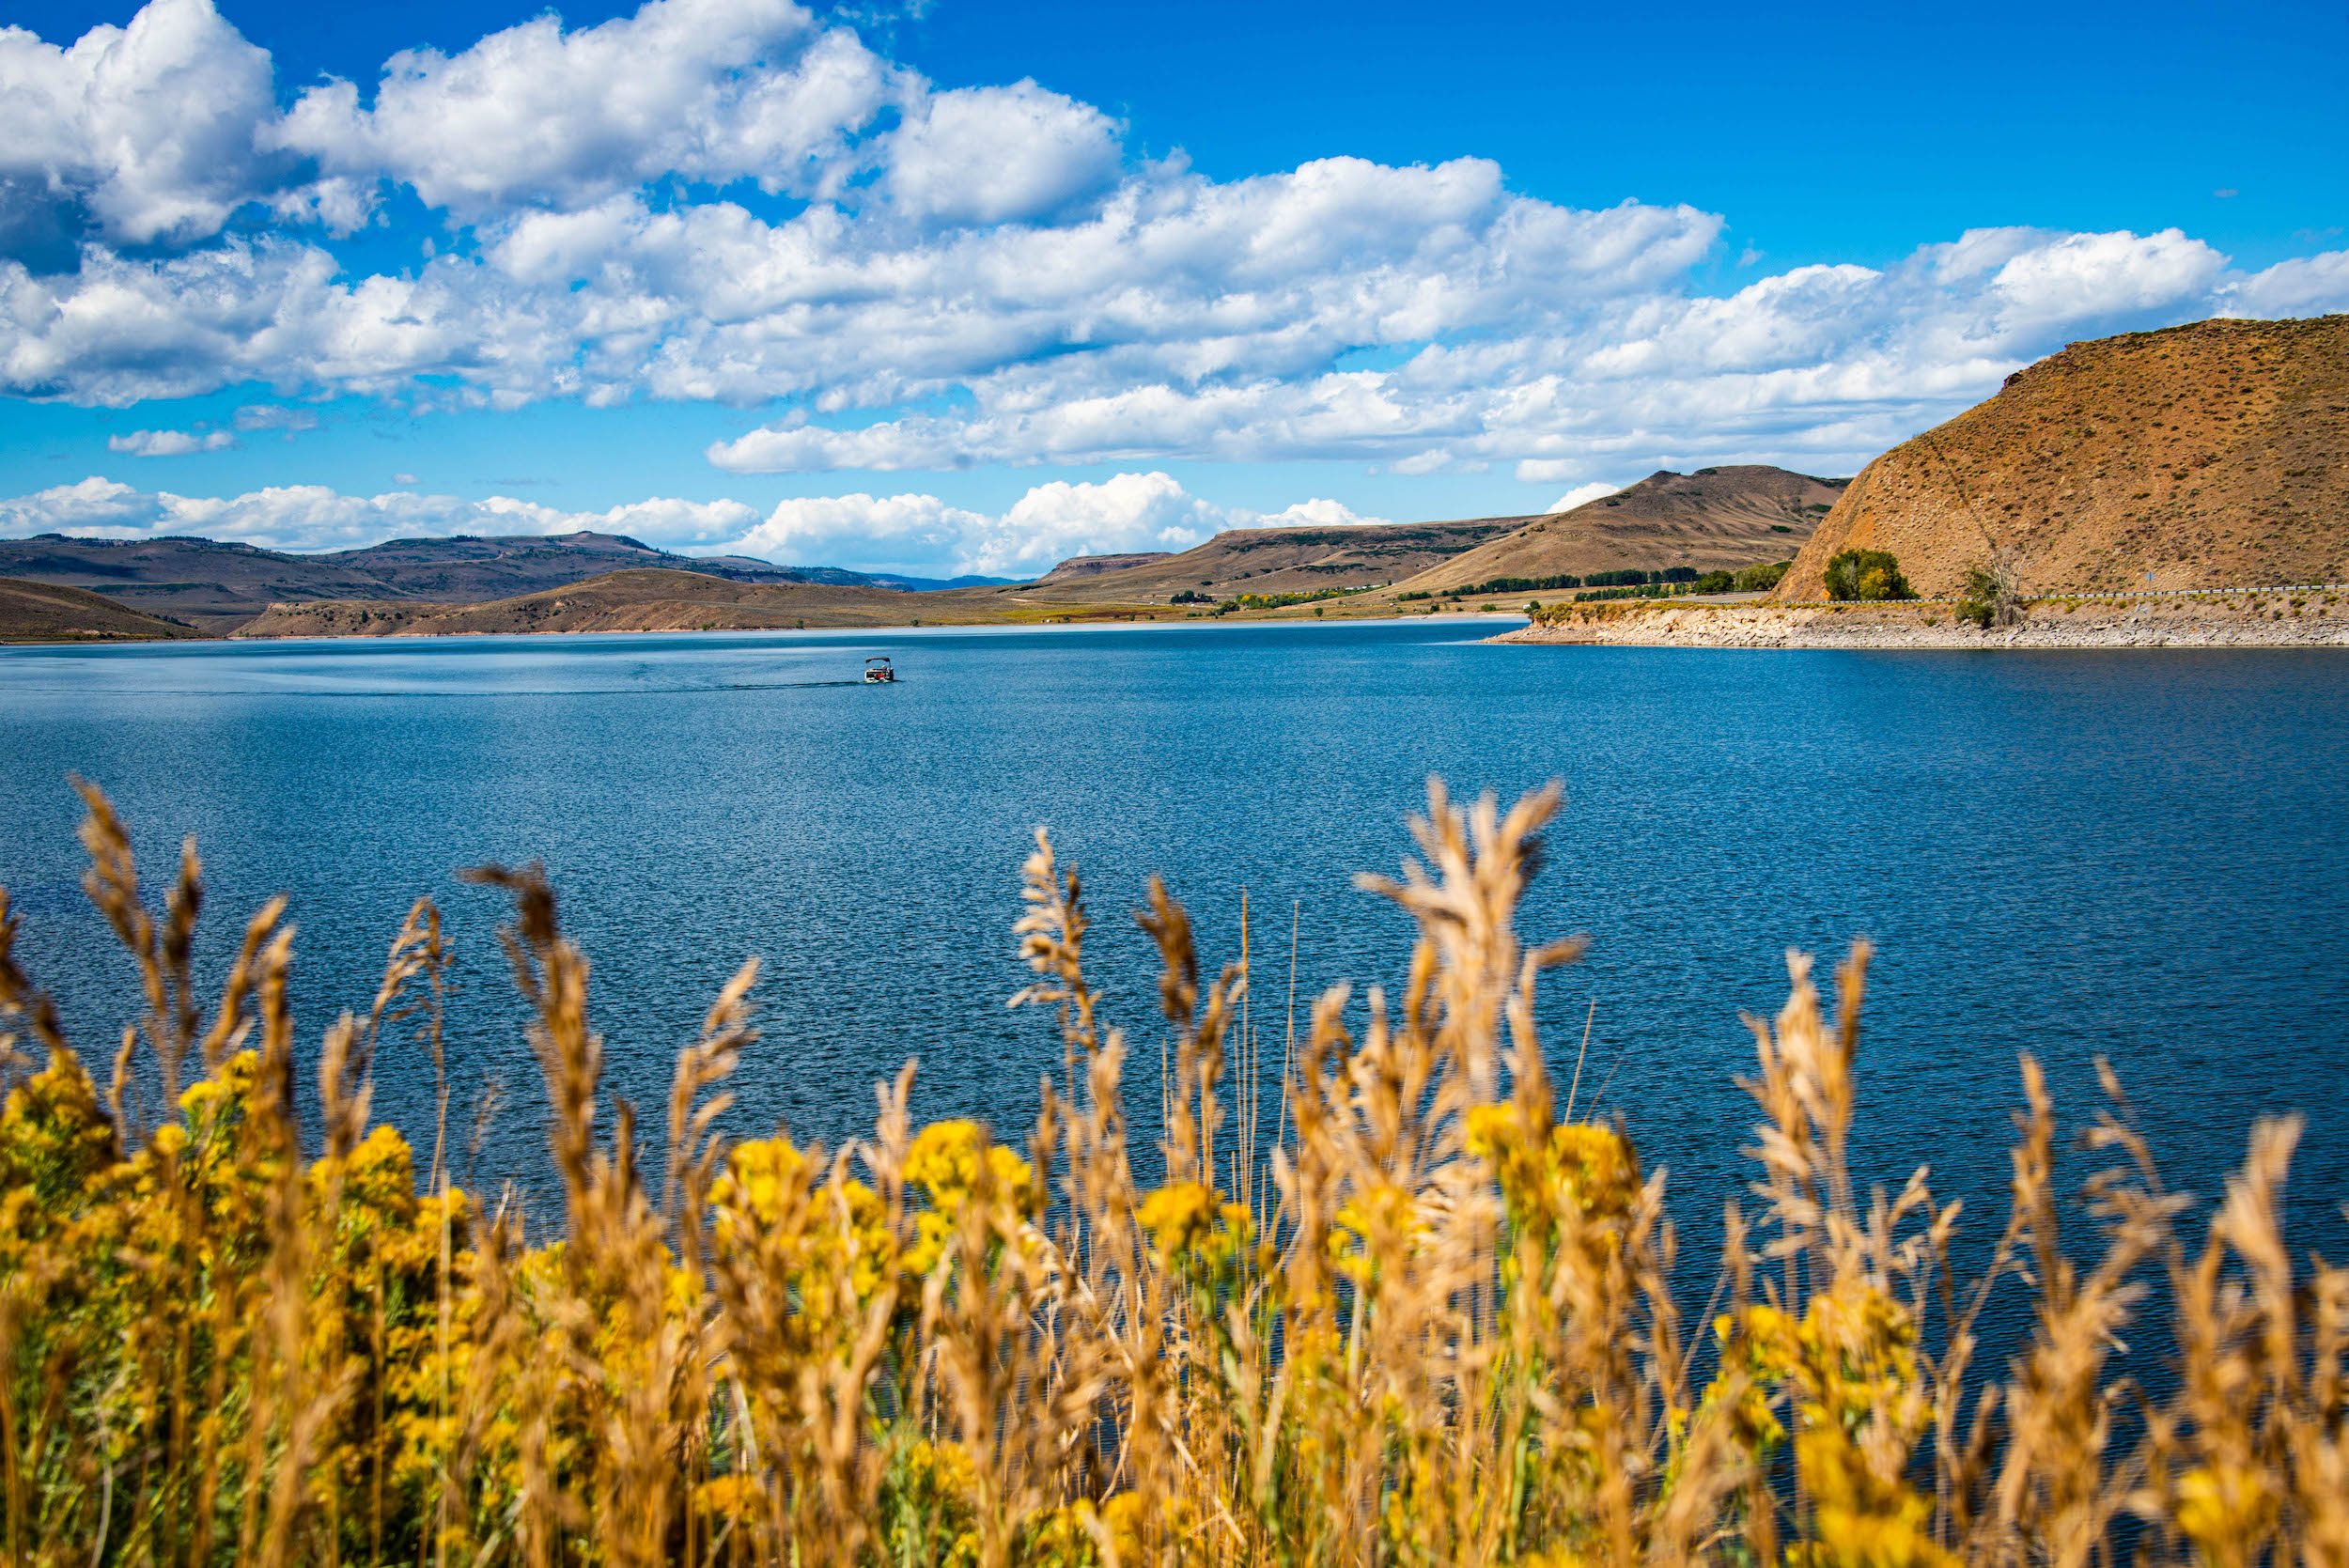 A lakeshore. Blue Mesa Reservoir is the largest lake in Colorado